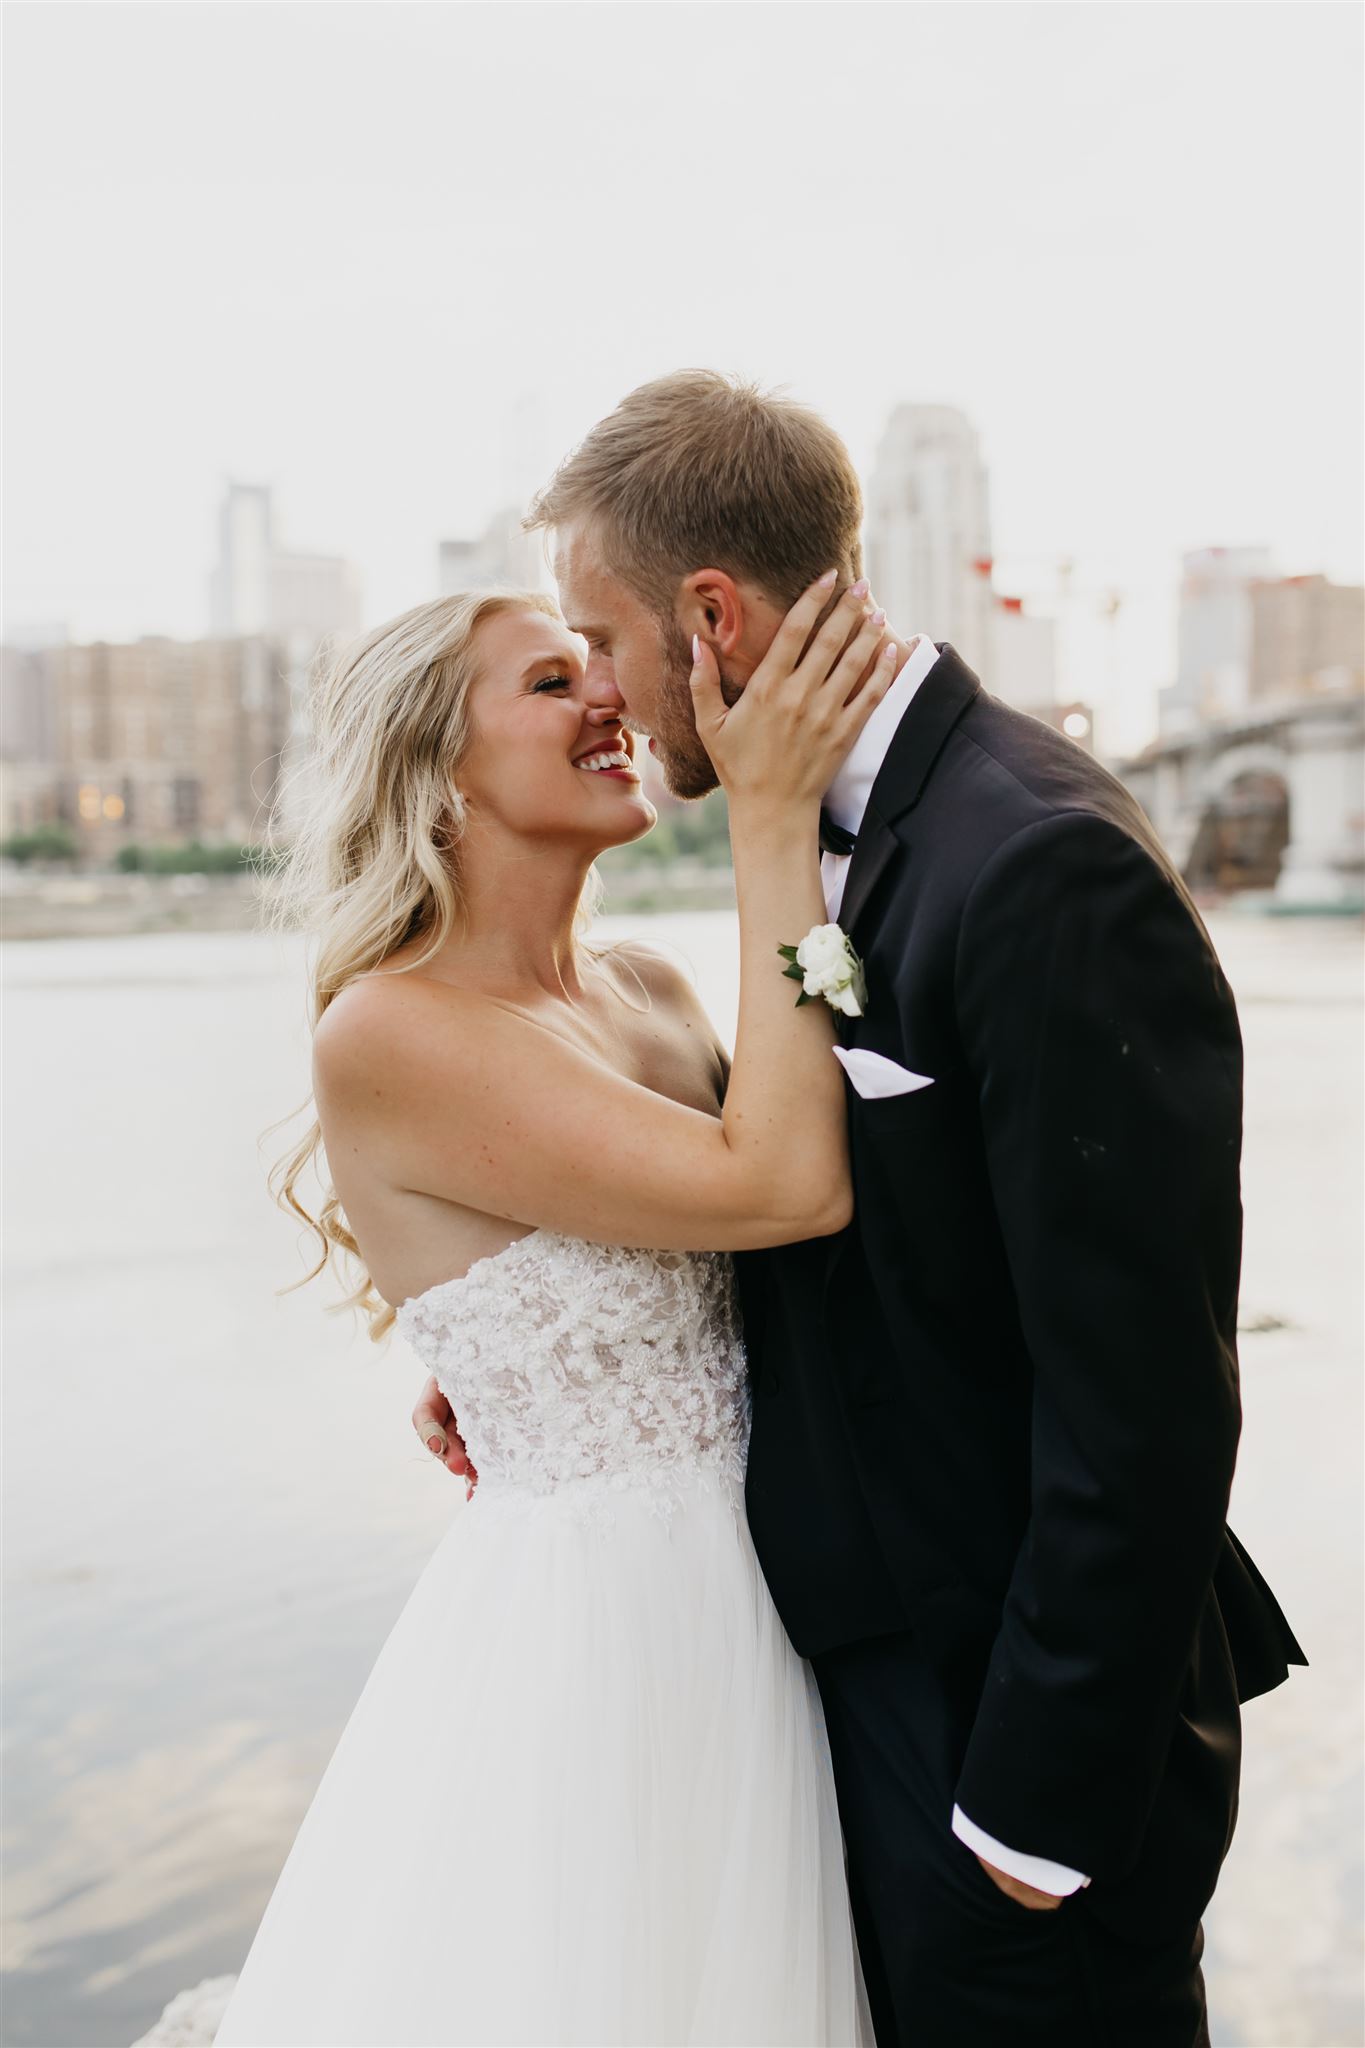 A sweet couples portrait in Minnesota during their wedding day